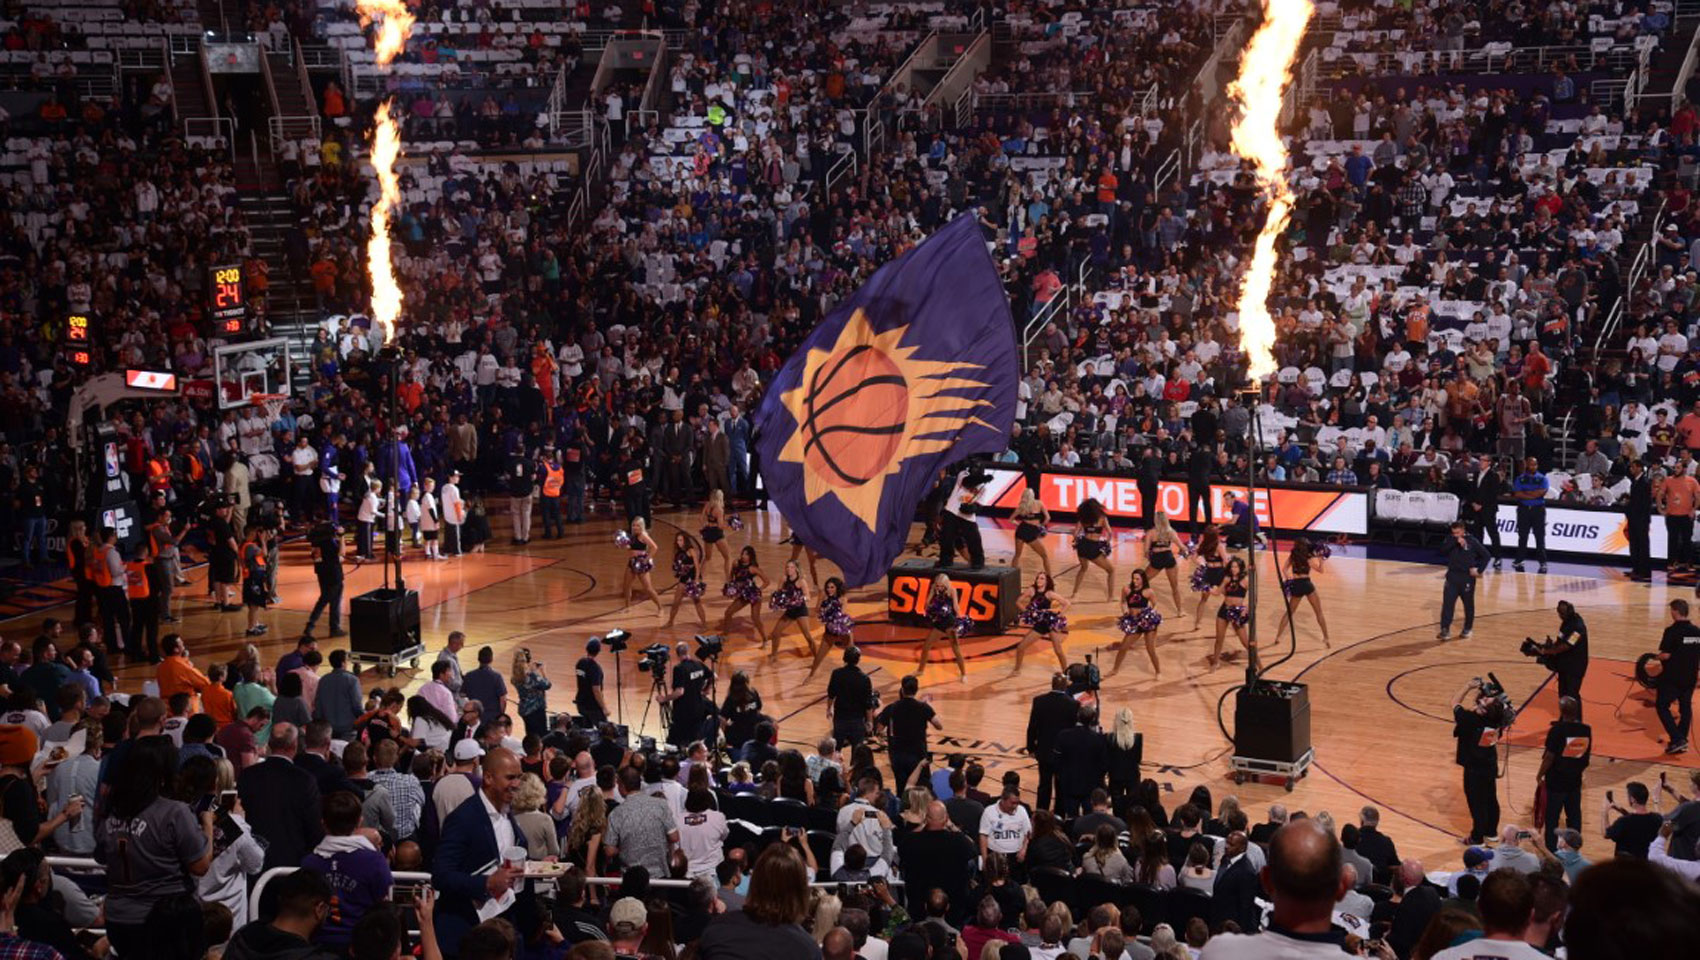 Phoenix Suns home game during halftime show